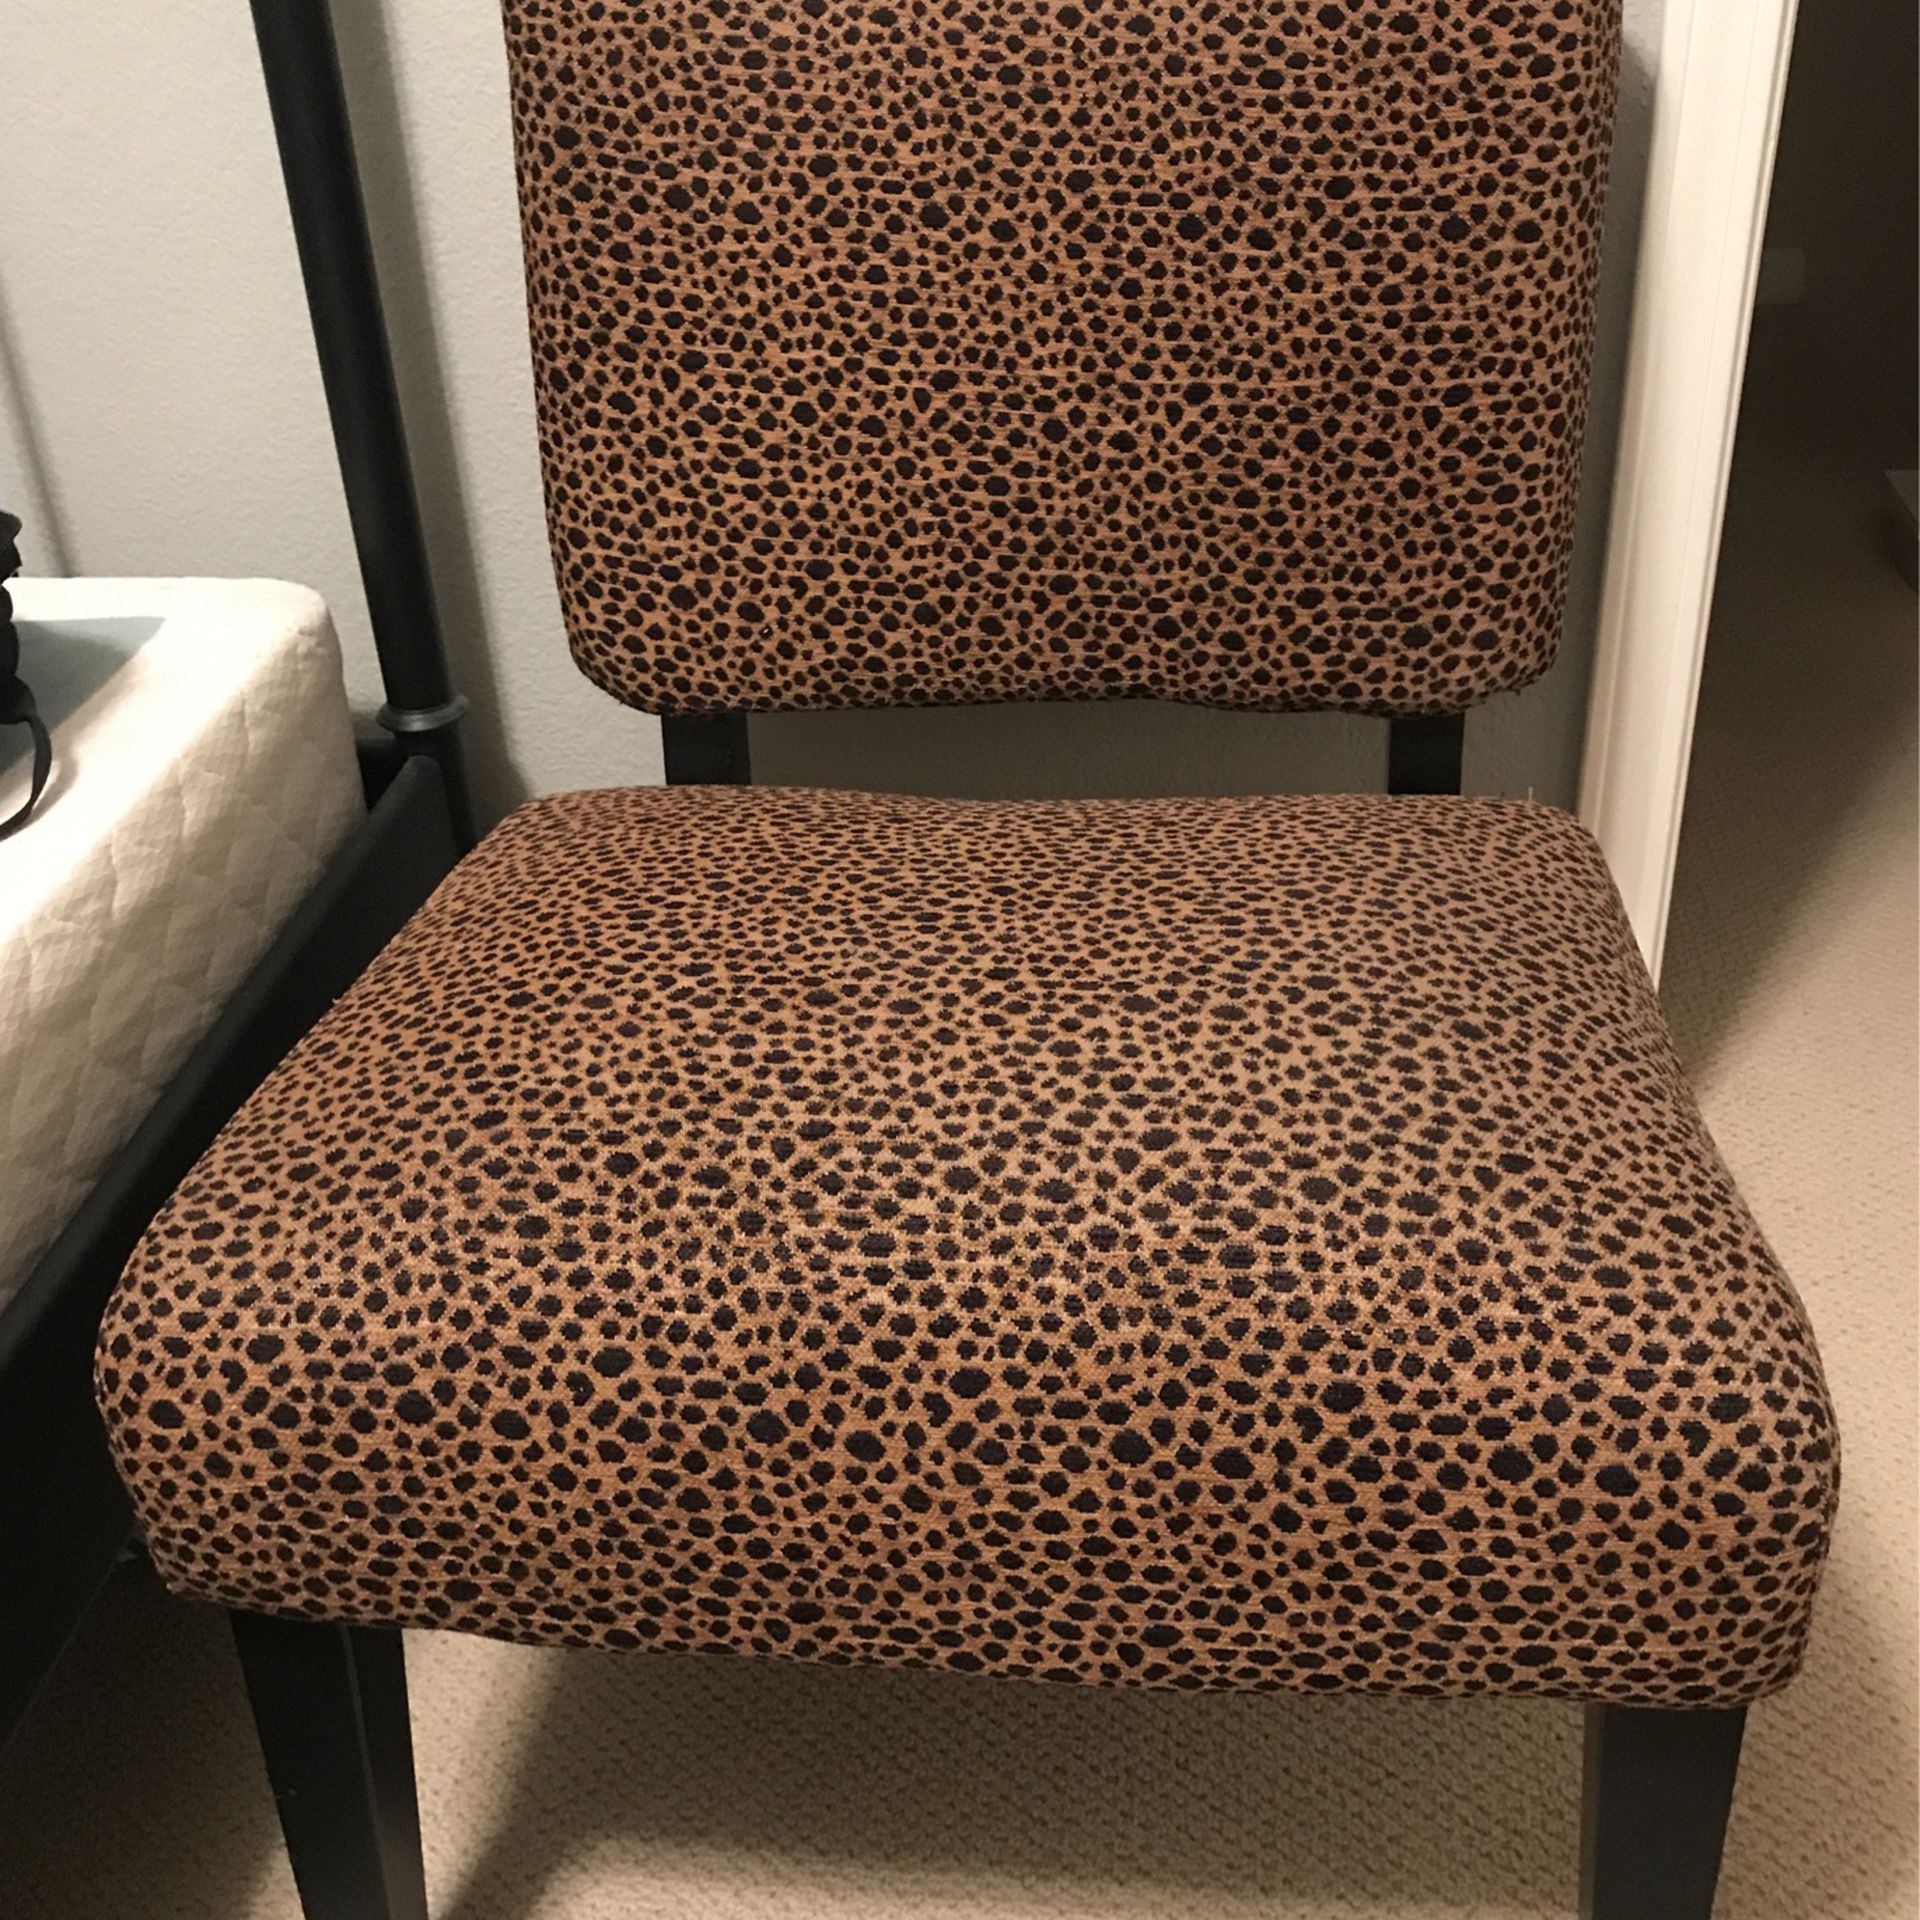 WondeGel Extreme Seat cushions. BRAND NEW NEVER USED for Sale in Concord,  CA - OfferUp